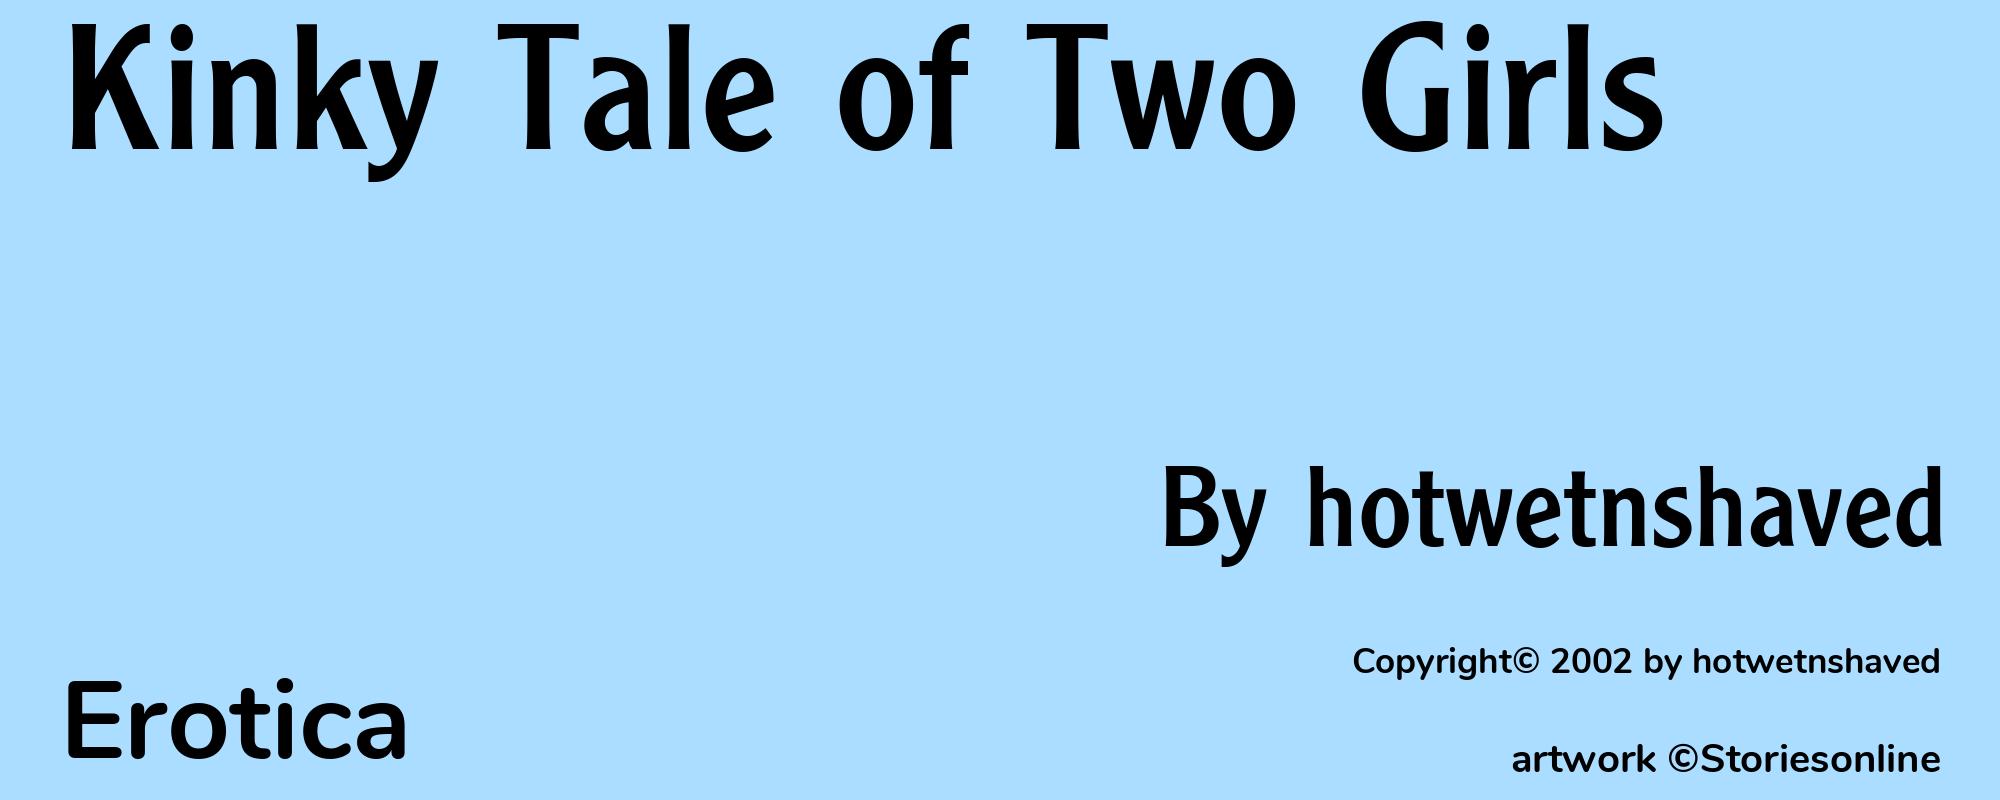 Kinky Tale of Two Girls - Cover